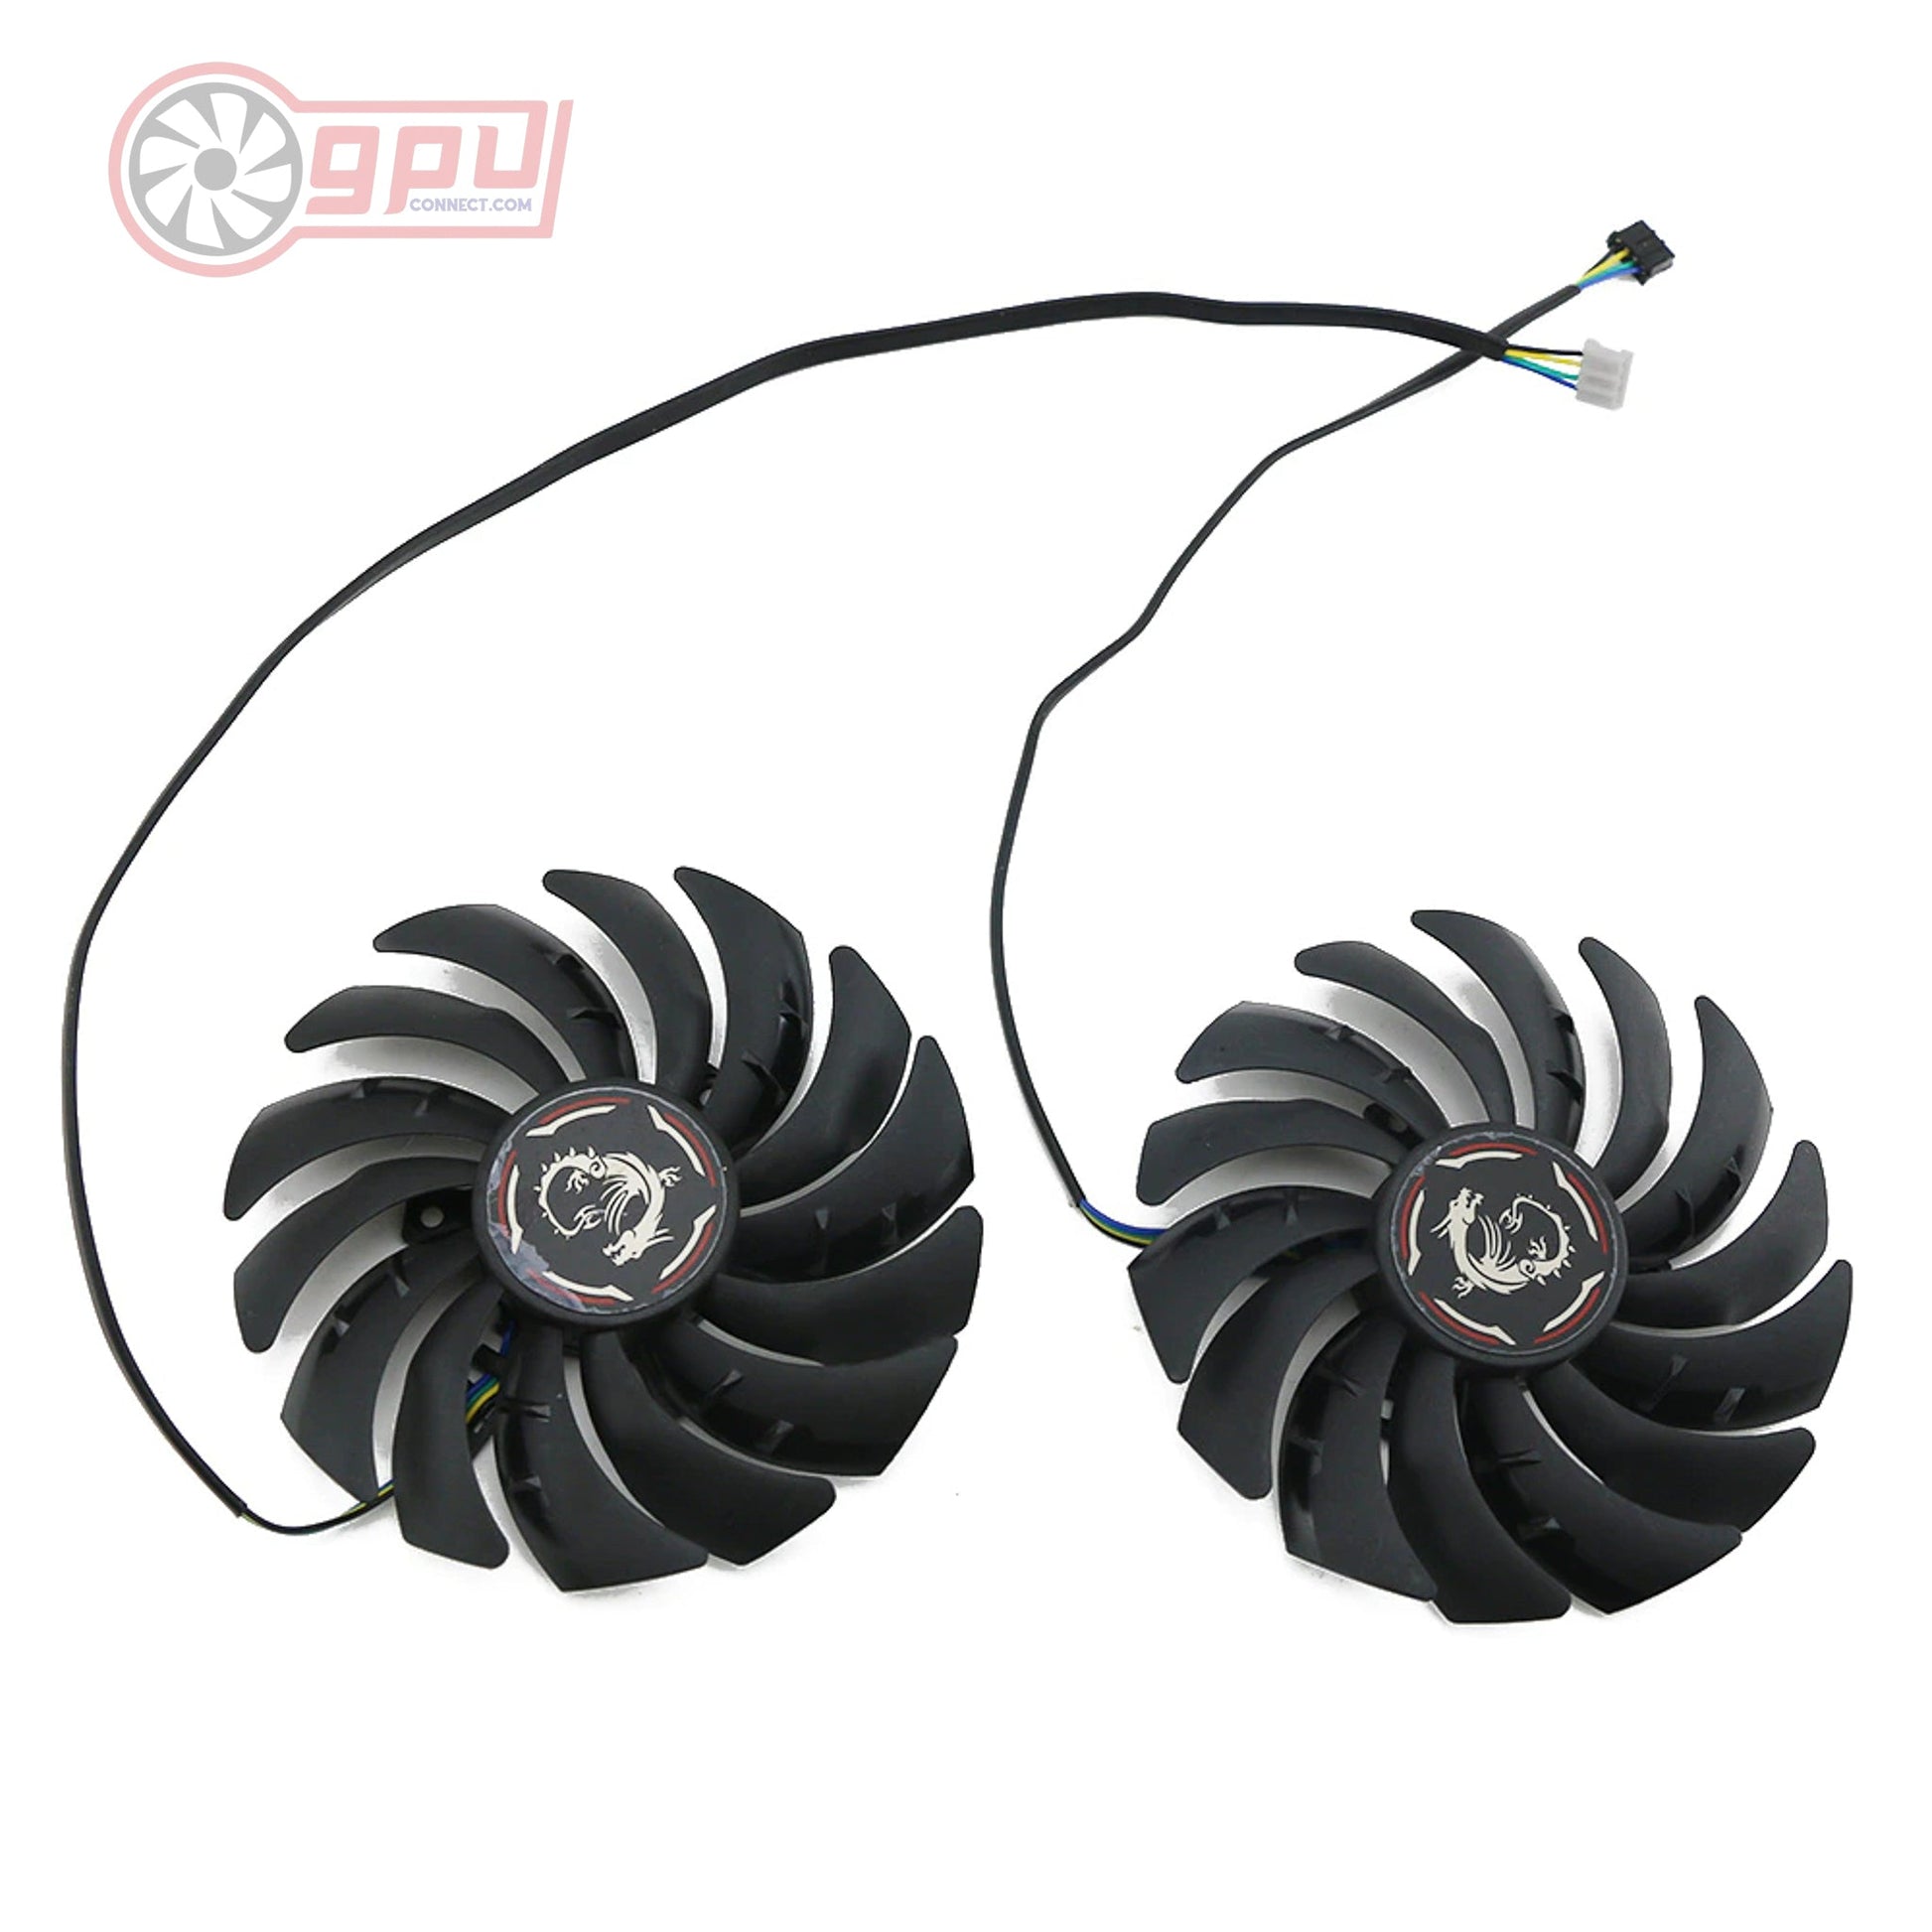 MSI RTX 2070 GAMING Z Replacement Graphics Card Card Cooling Fan - GPUCONNECT.COM